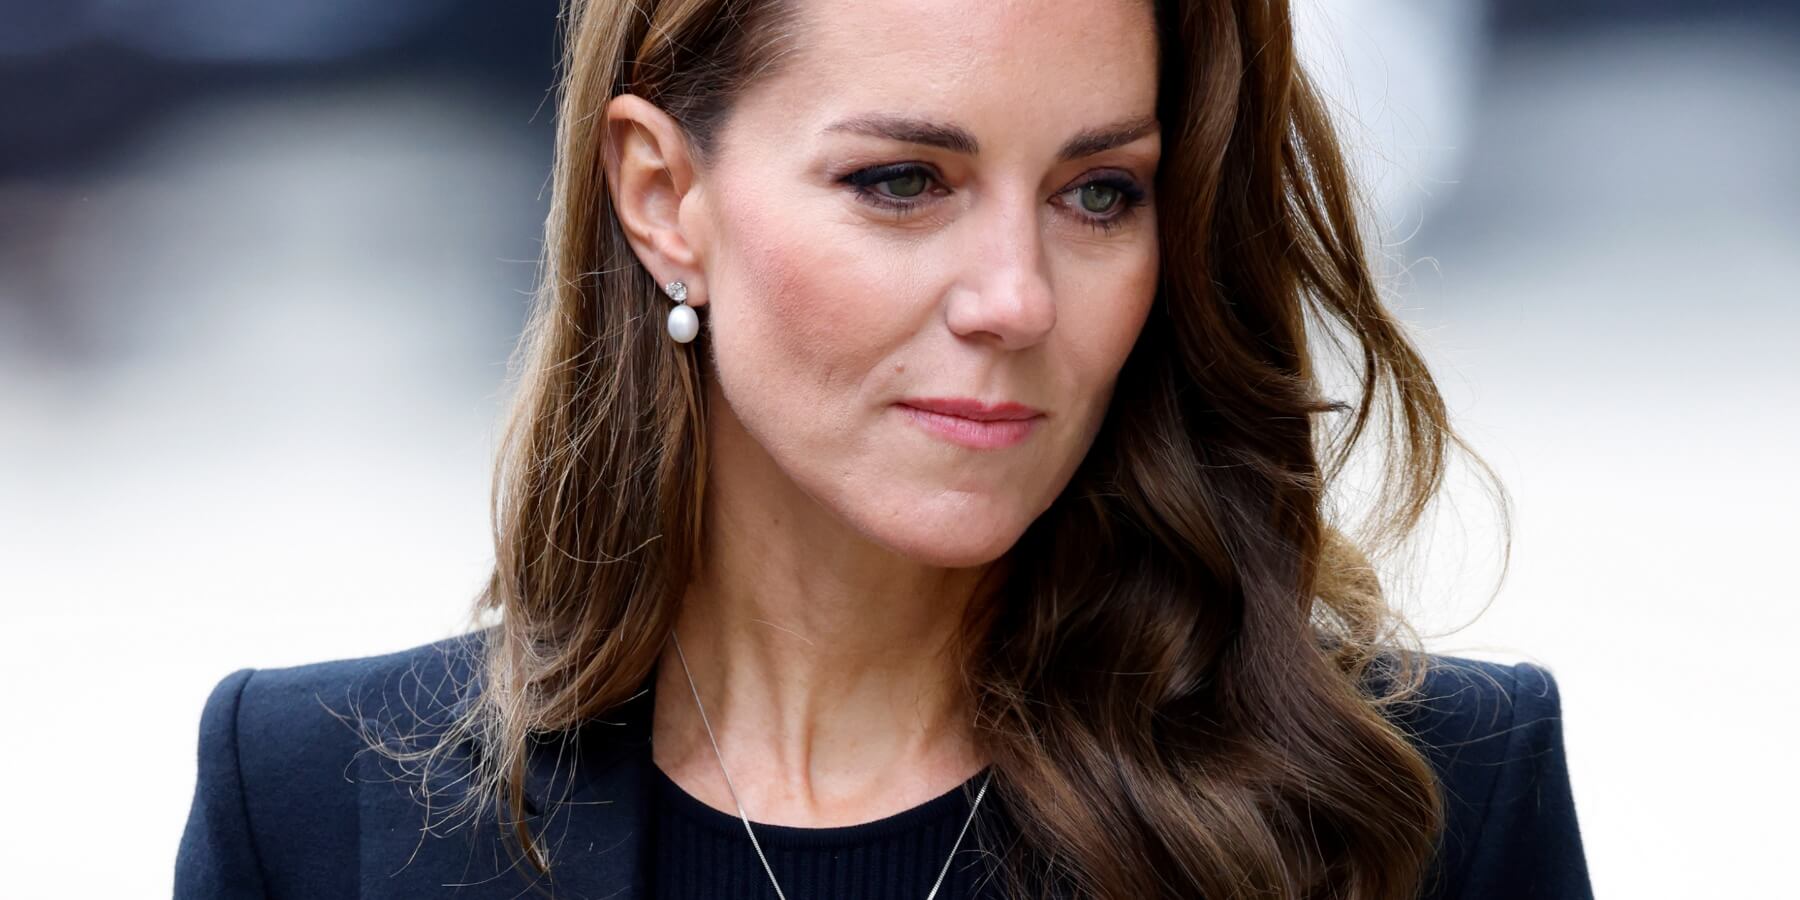 Kate Middleton: The 6 Most Hopeful Words in Her Cancer Announcement